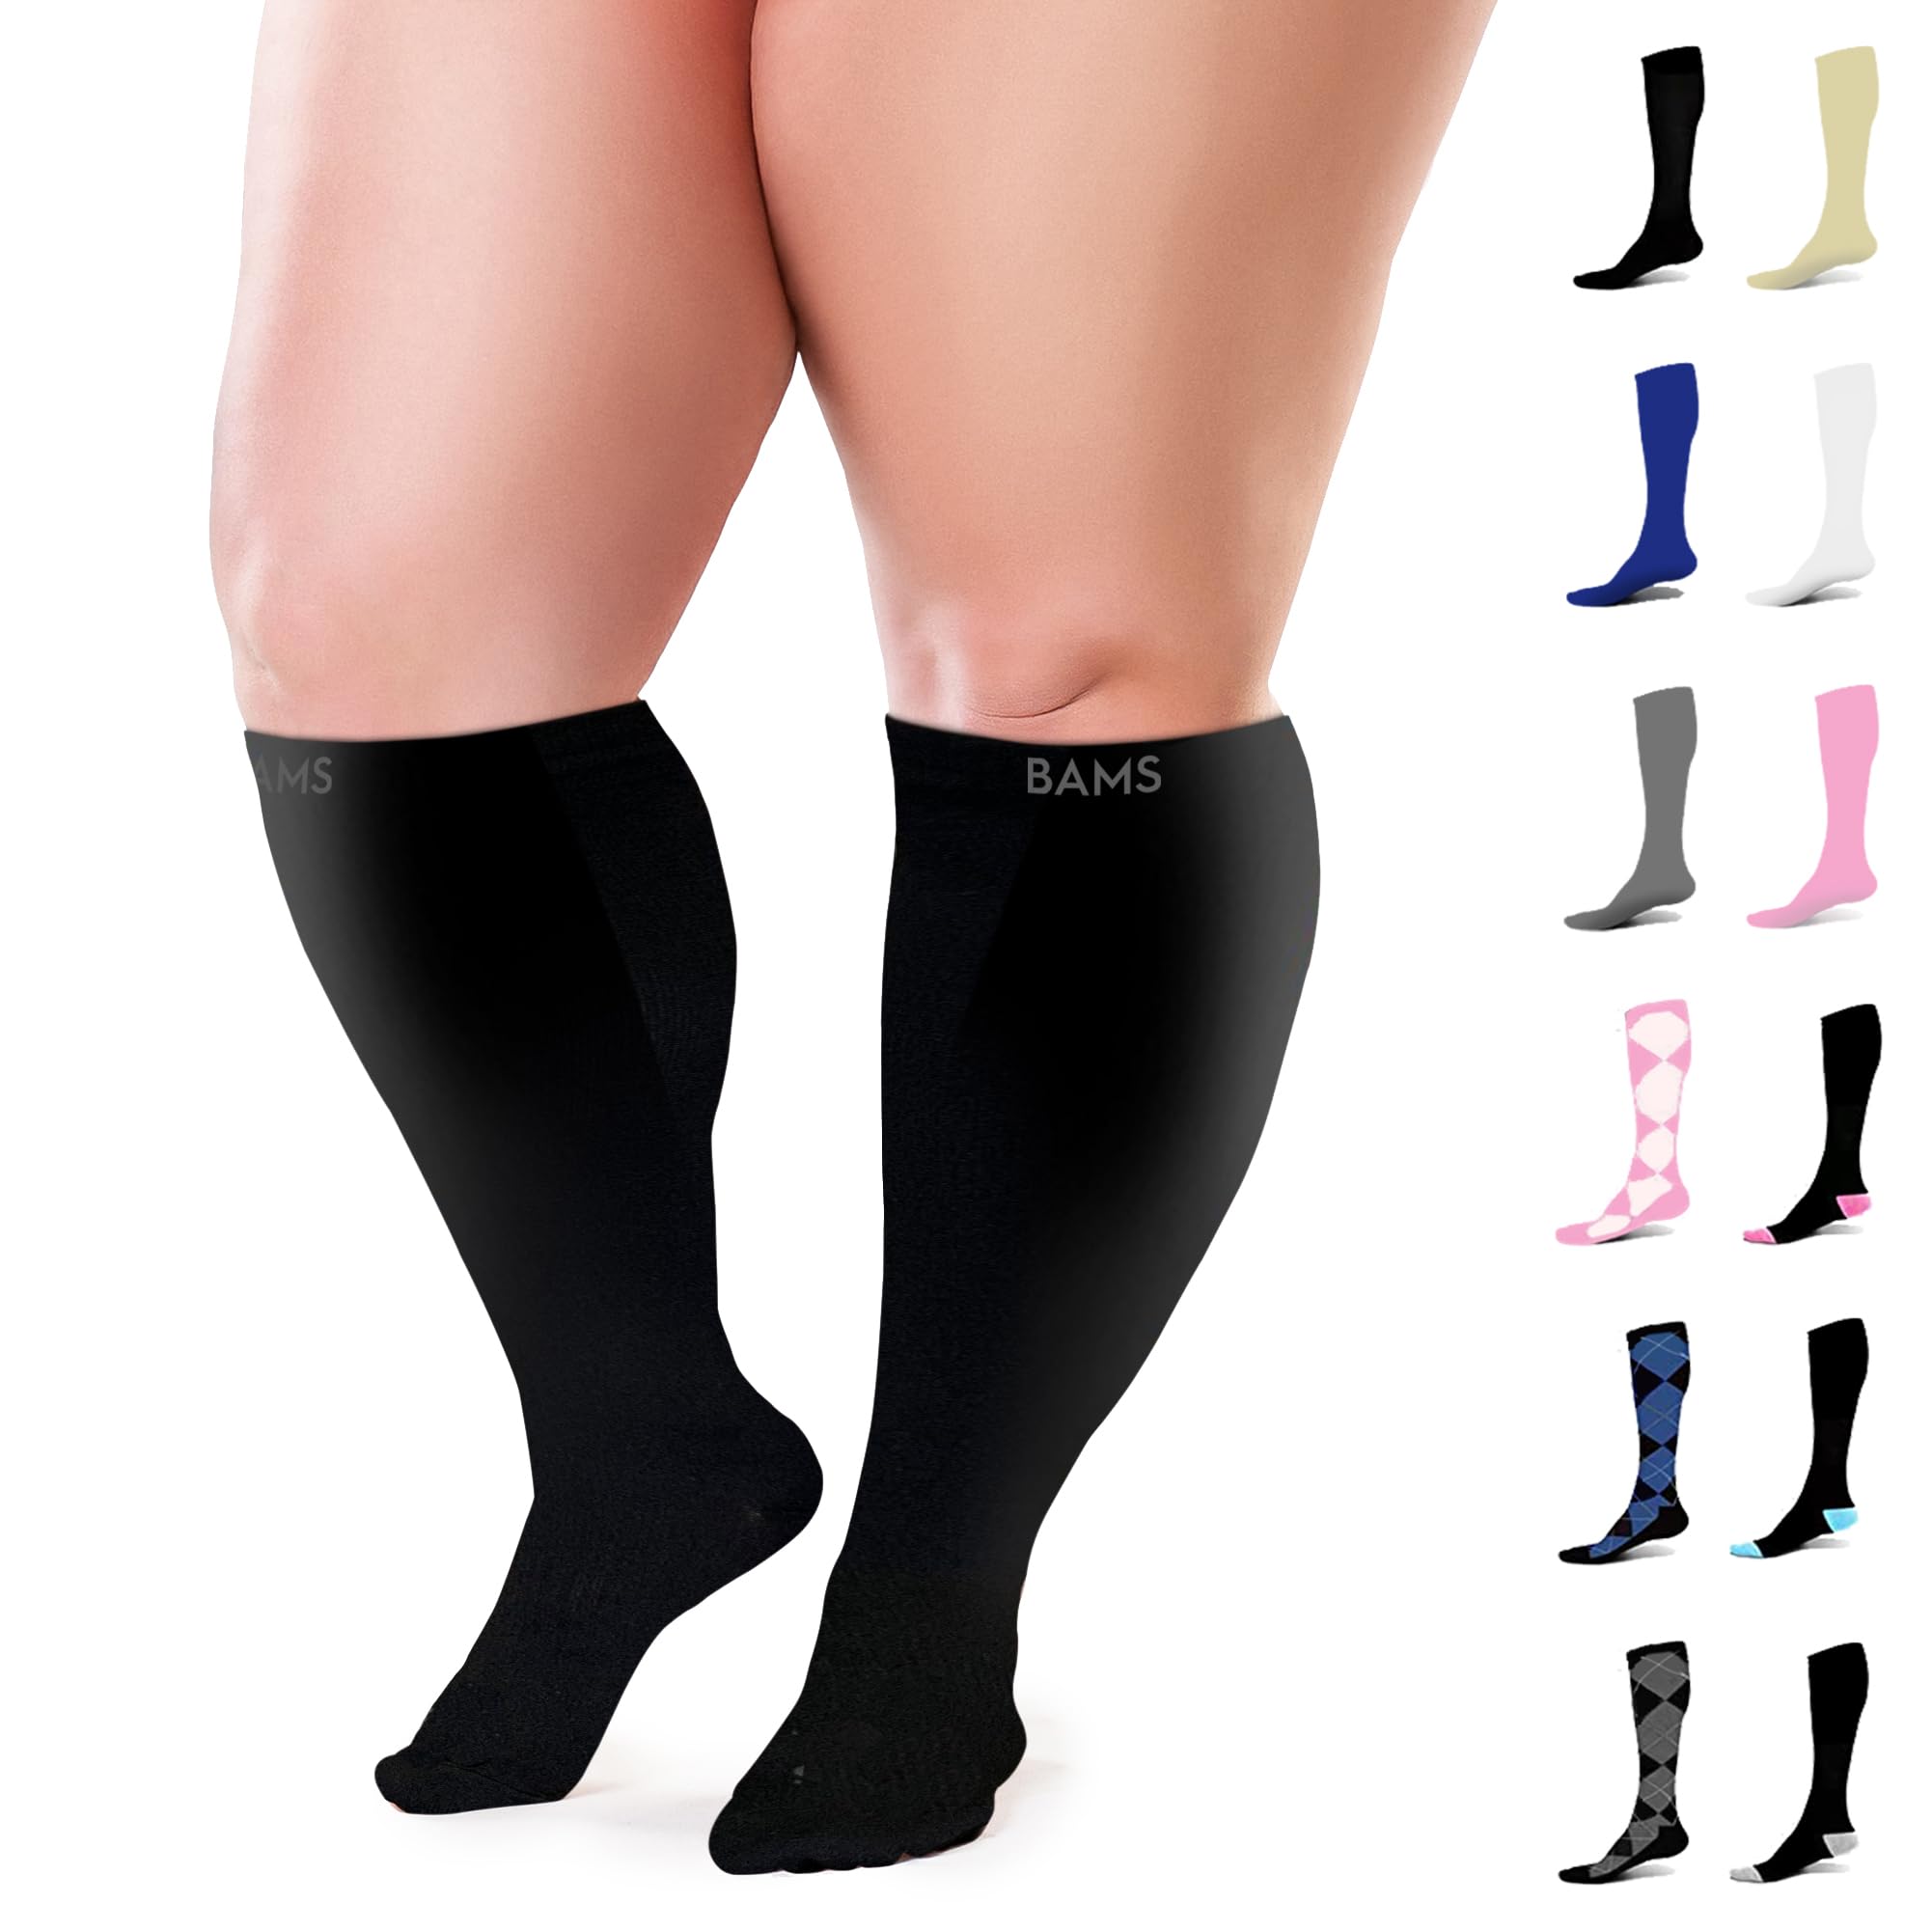 BAMS Plus Size Compression Socks Wide Calf XL XXL XXXL – Graduated Knee-High Support, Viscose from Bamboo Easy-On/Easy-Off (Black, 2X-Large)